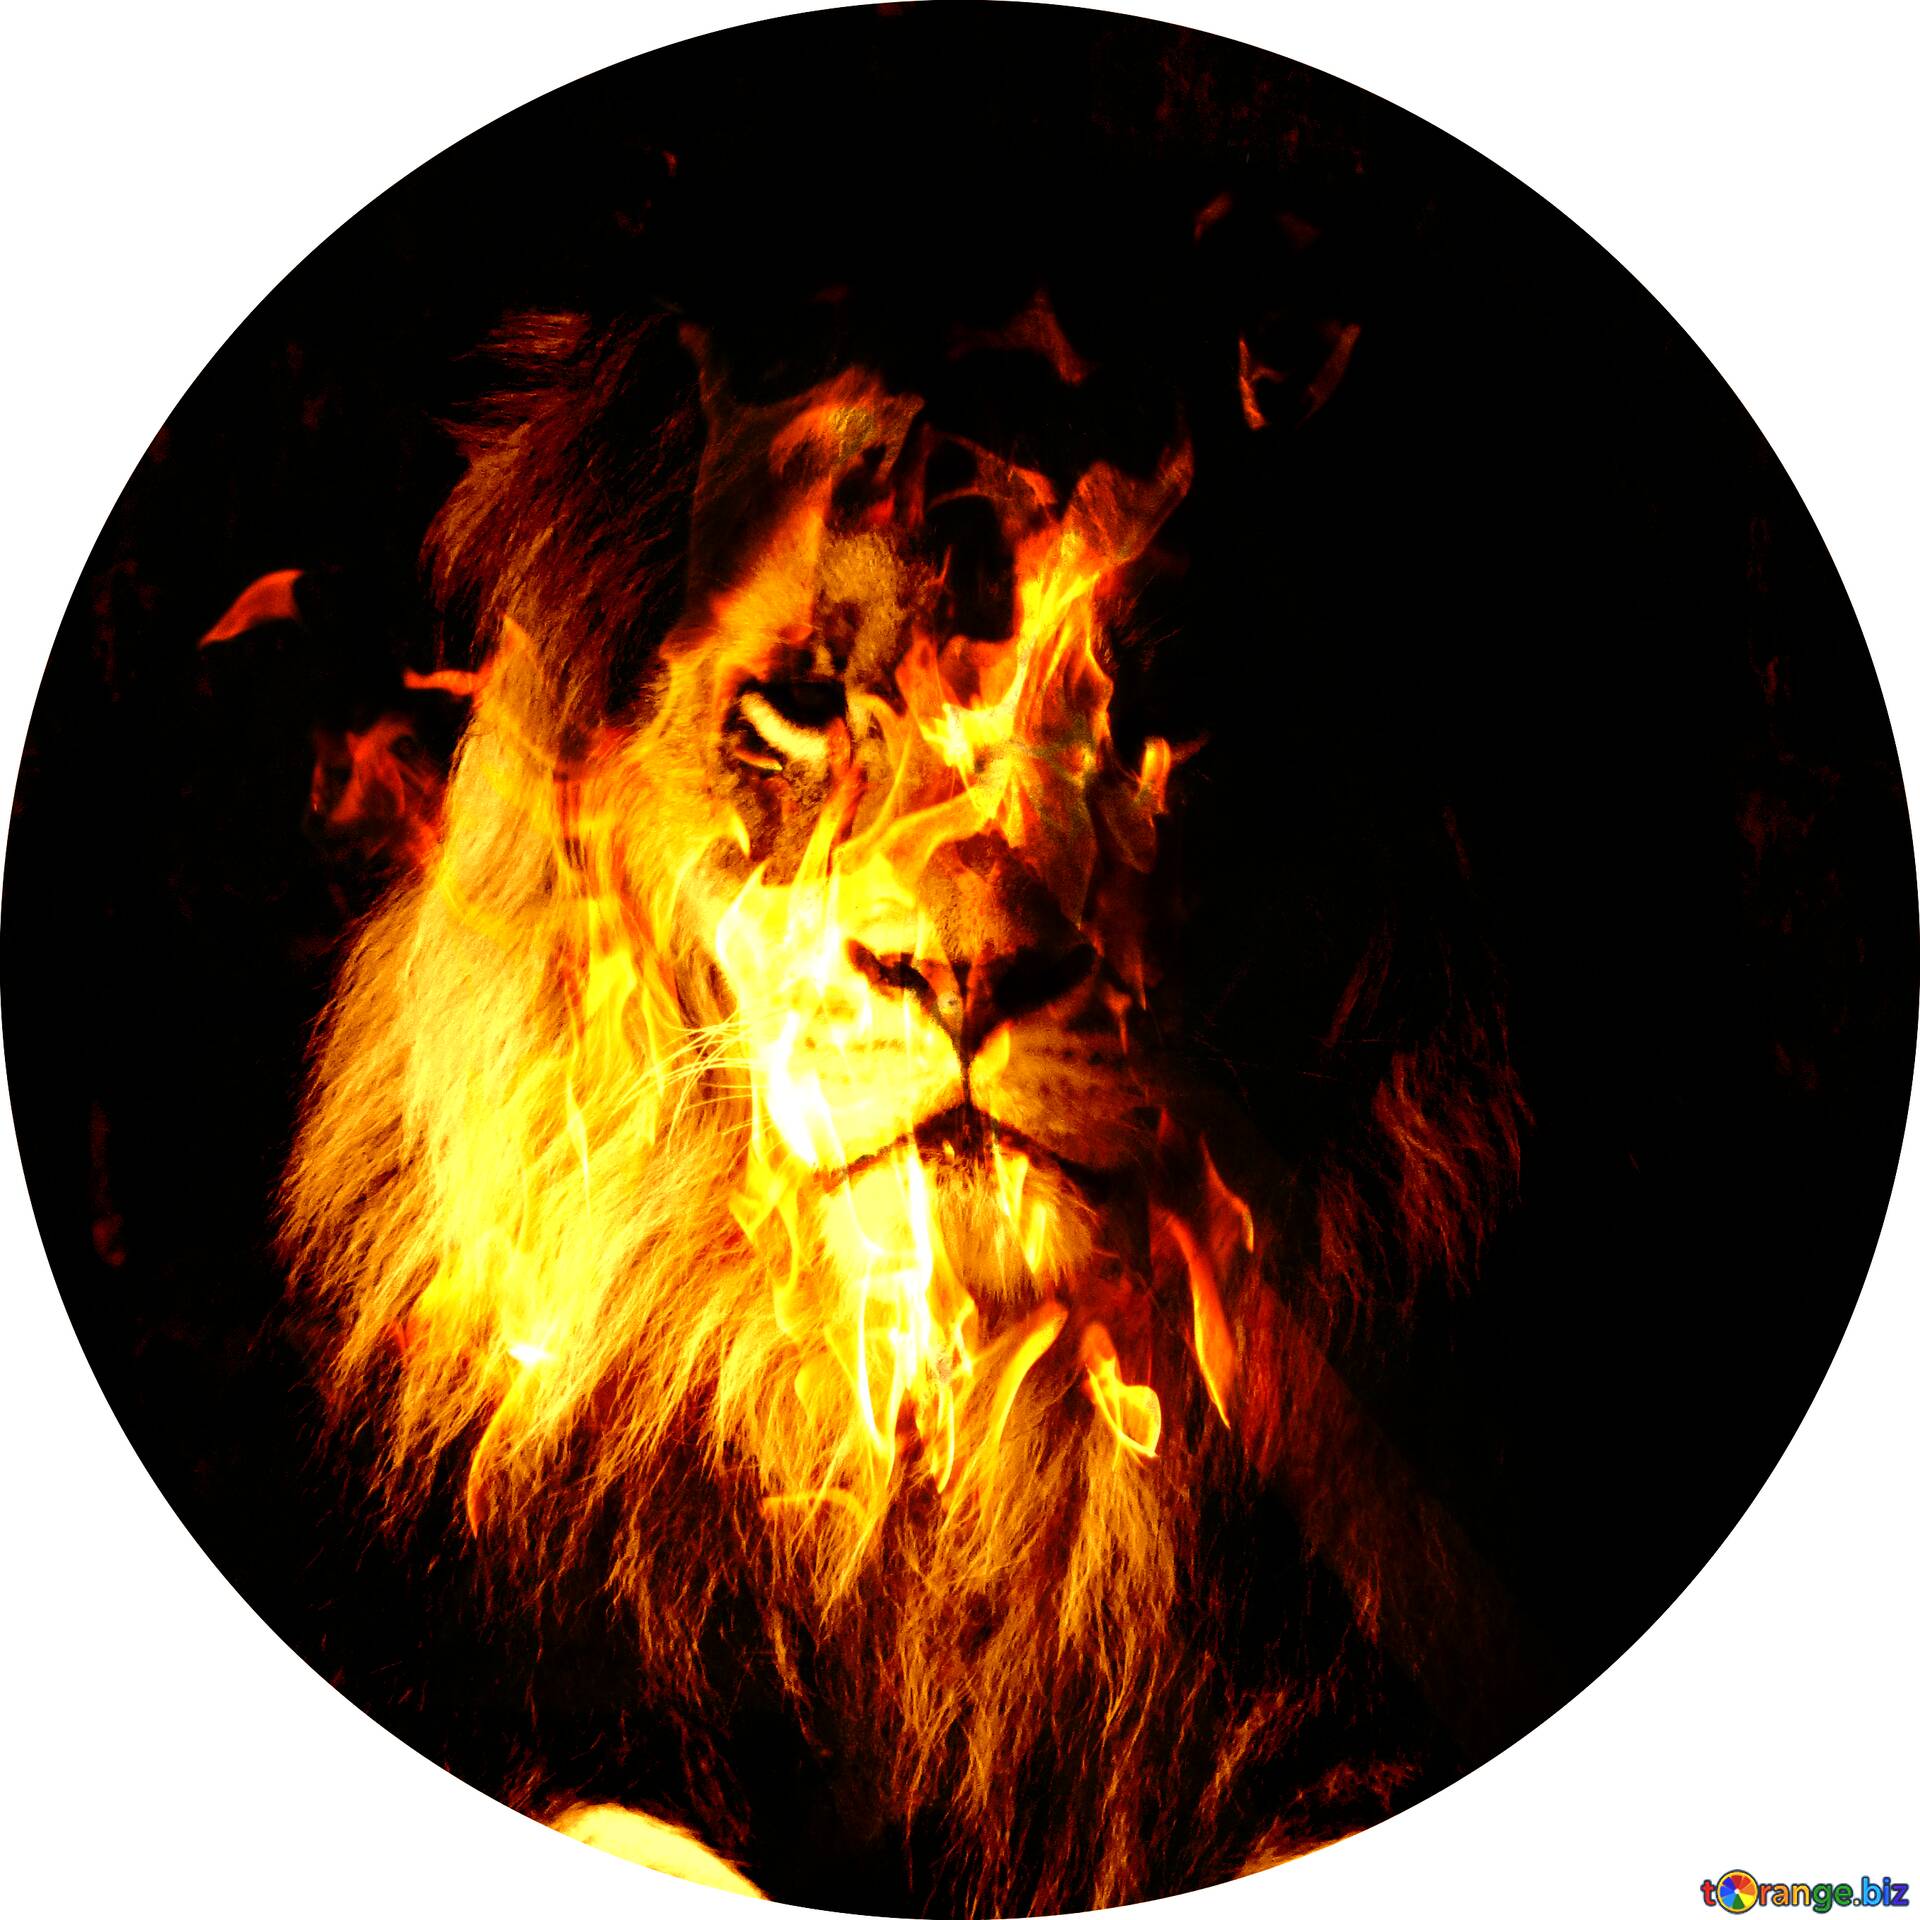 Download Free Picture Lion Fire Profile Picture On Cc By License Free Image Stock Torange Biz Fx 208269